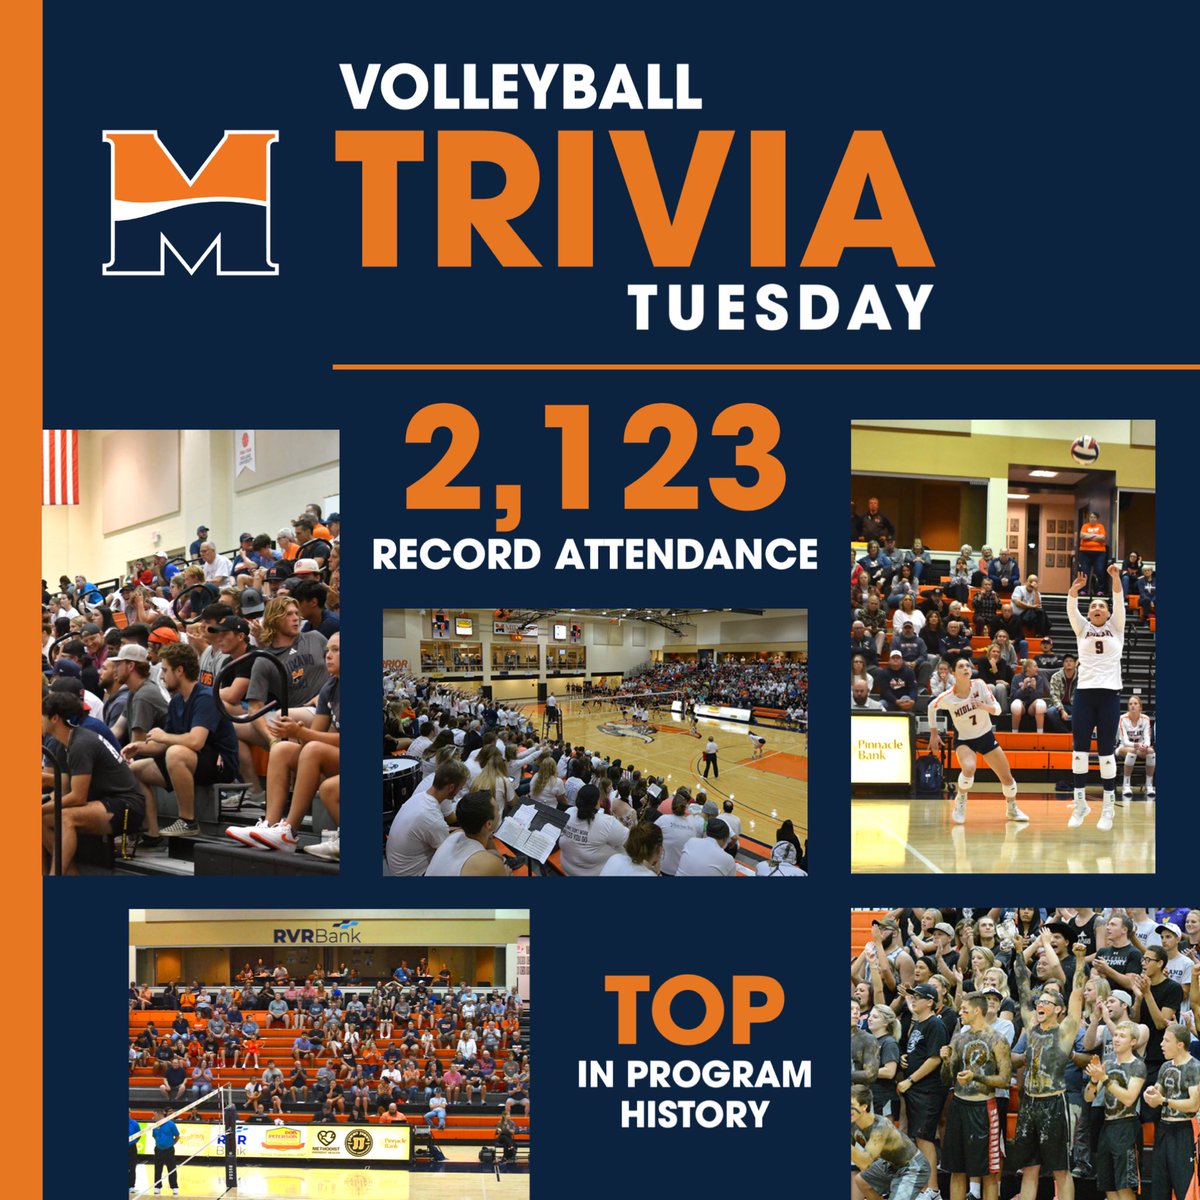 Home is where the fans are. 🧡 On August 22, 2018, then 11th-ranked Midland beat Peru State in front of a record crowd of 2,123 people. Every fall, Midland consistently draws one of the top home volleyball crowds in the NAIA across the country.